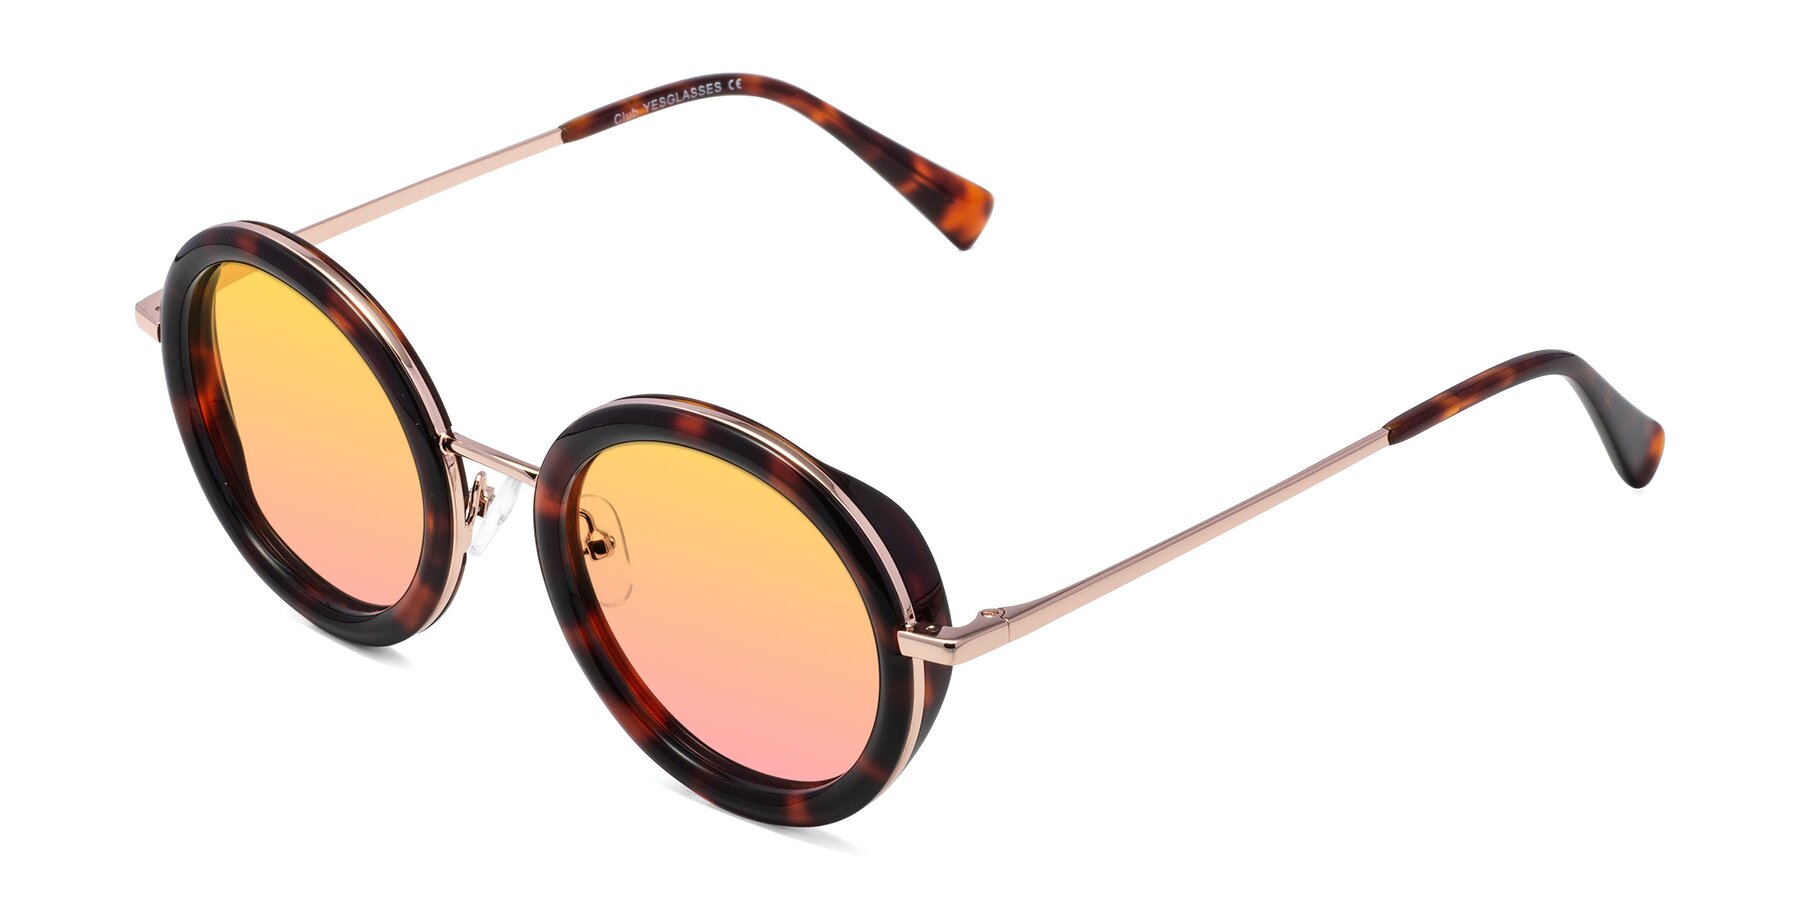 Angle of Club in Tortoise-Rose Gold with Yellow / Pink Gradient Lenses